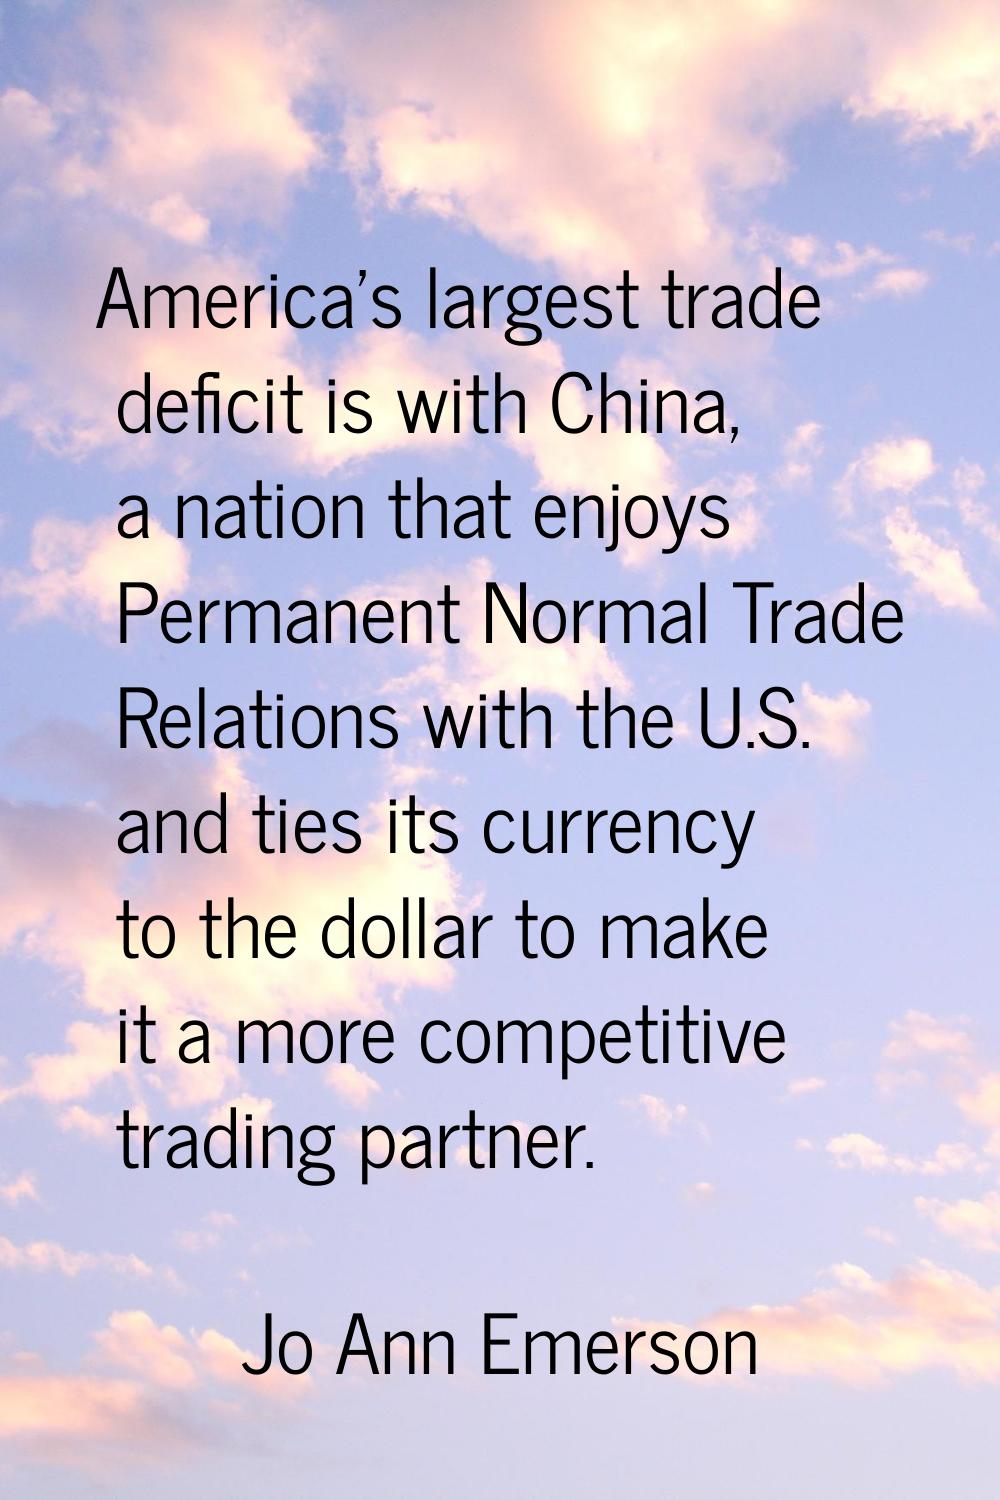 America's largest trade deficit is with China, a nation that enjoys Permanent Normal Trade Relation